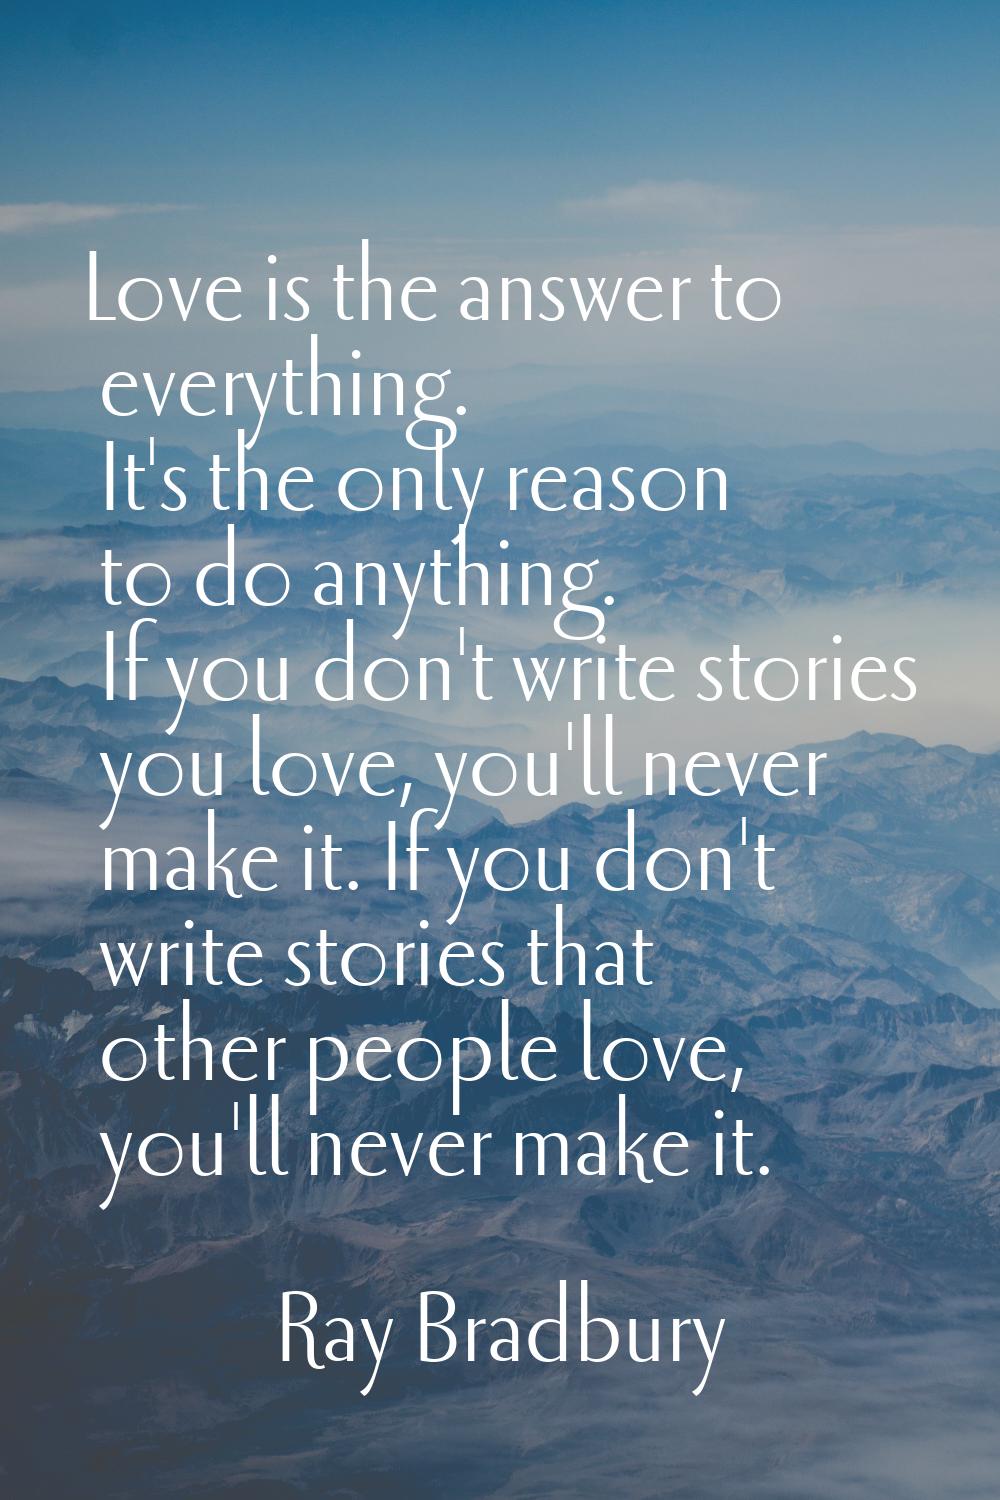 Love is the answer to everything. It's the only reason to do anything. If you don't write stories y